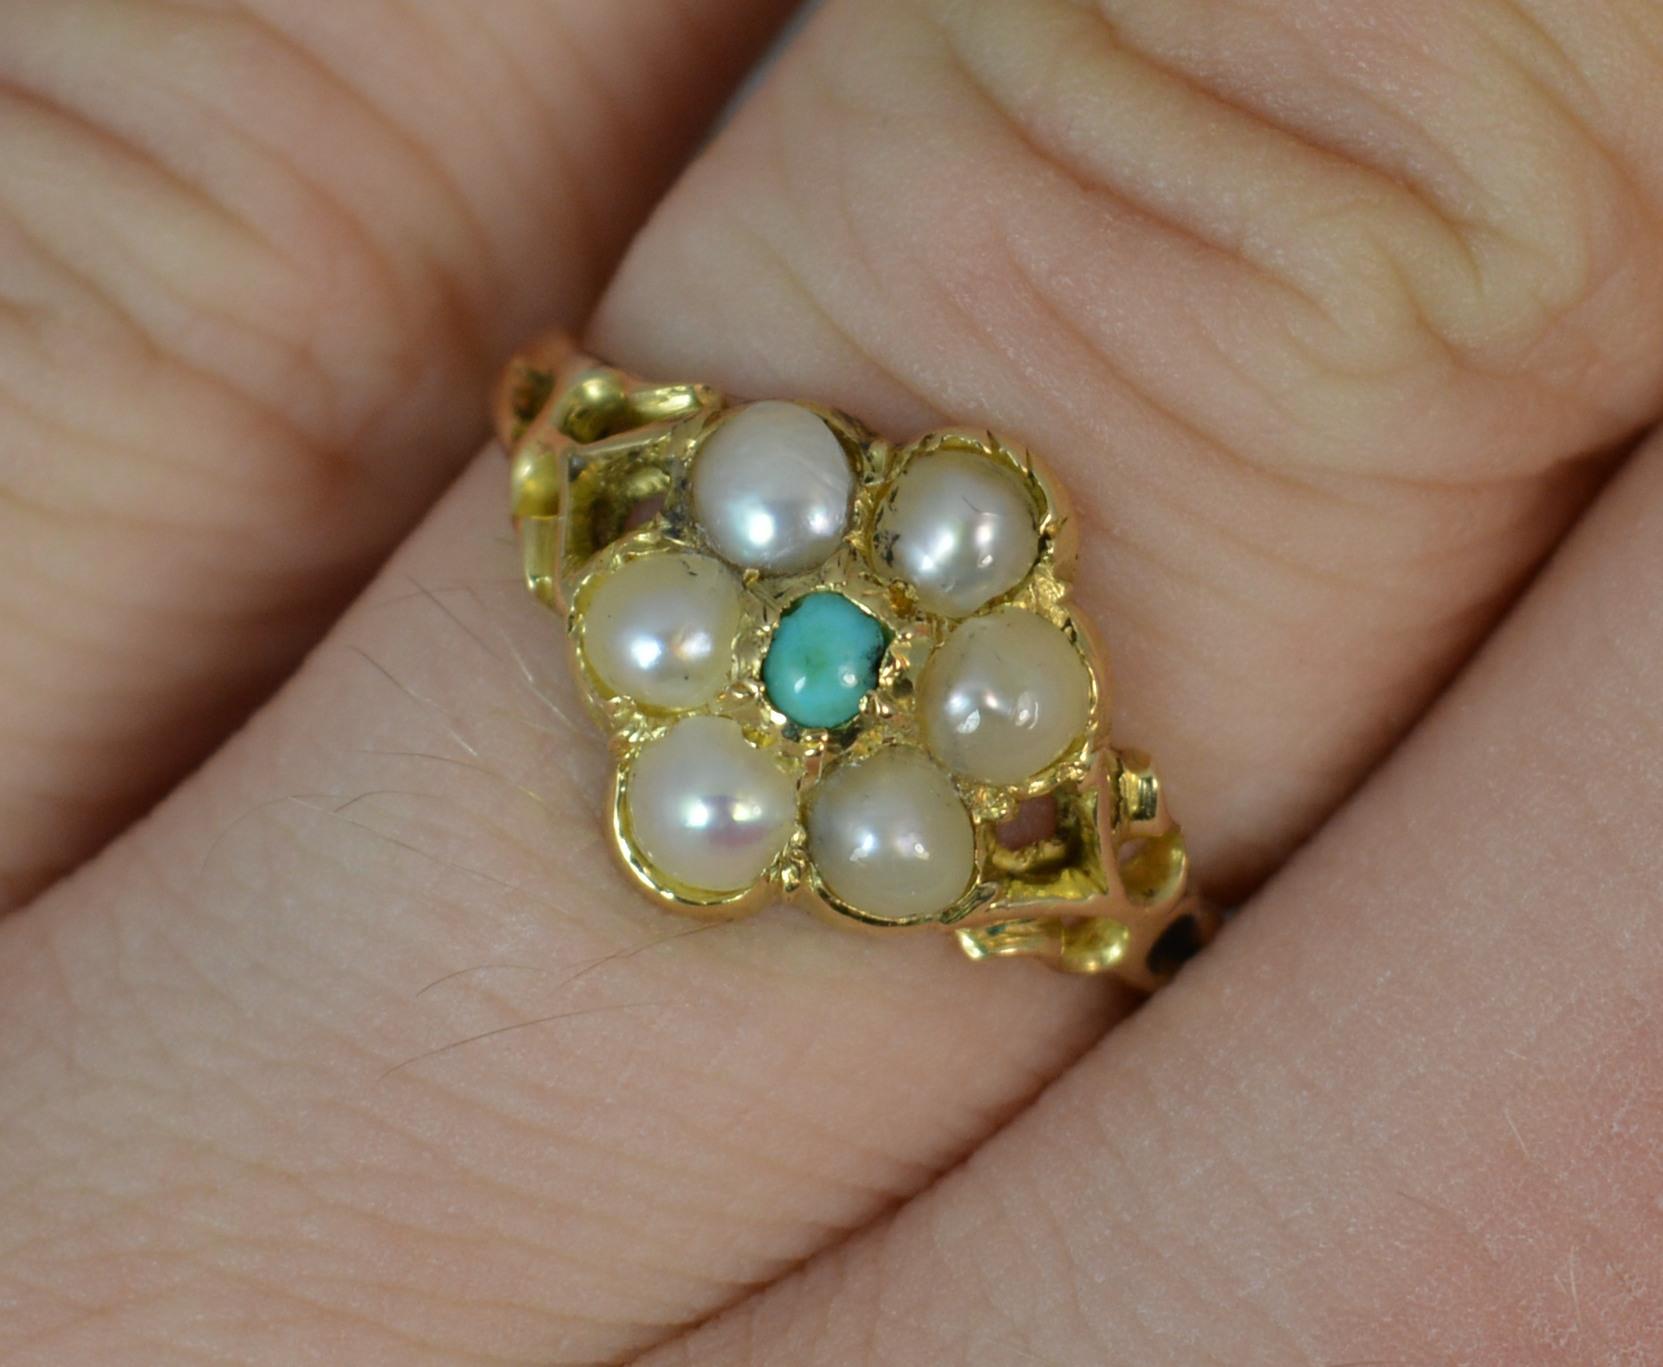 A superb Georgian period cluster ring. 
SIZE ; M 1/2 UK, 6 1/2 US
18 carat yellow gold example.
Designed with a turquoise to the centre of six creamy pearls with pierced shoulders.
9.5mm x 11mm cluster head.

CONDITION ; Very good for age. Clean and